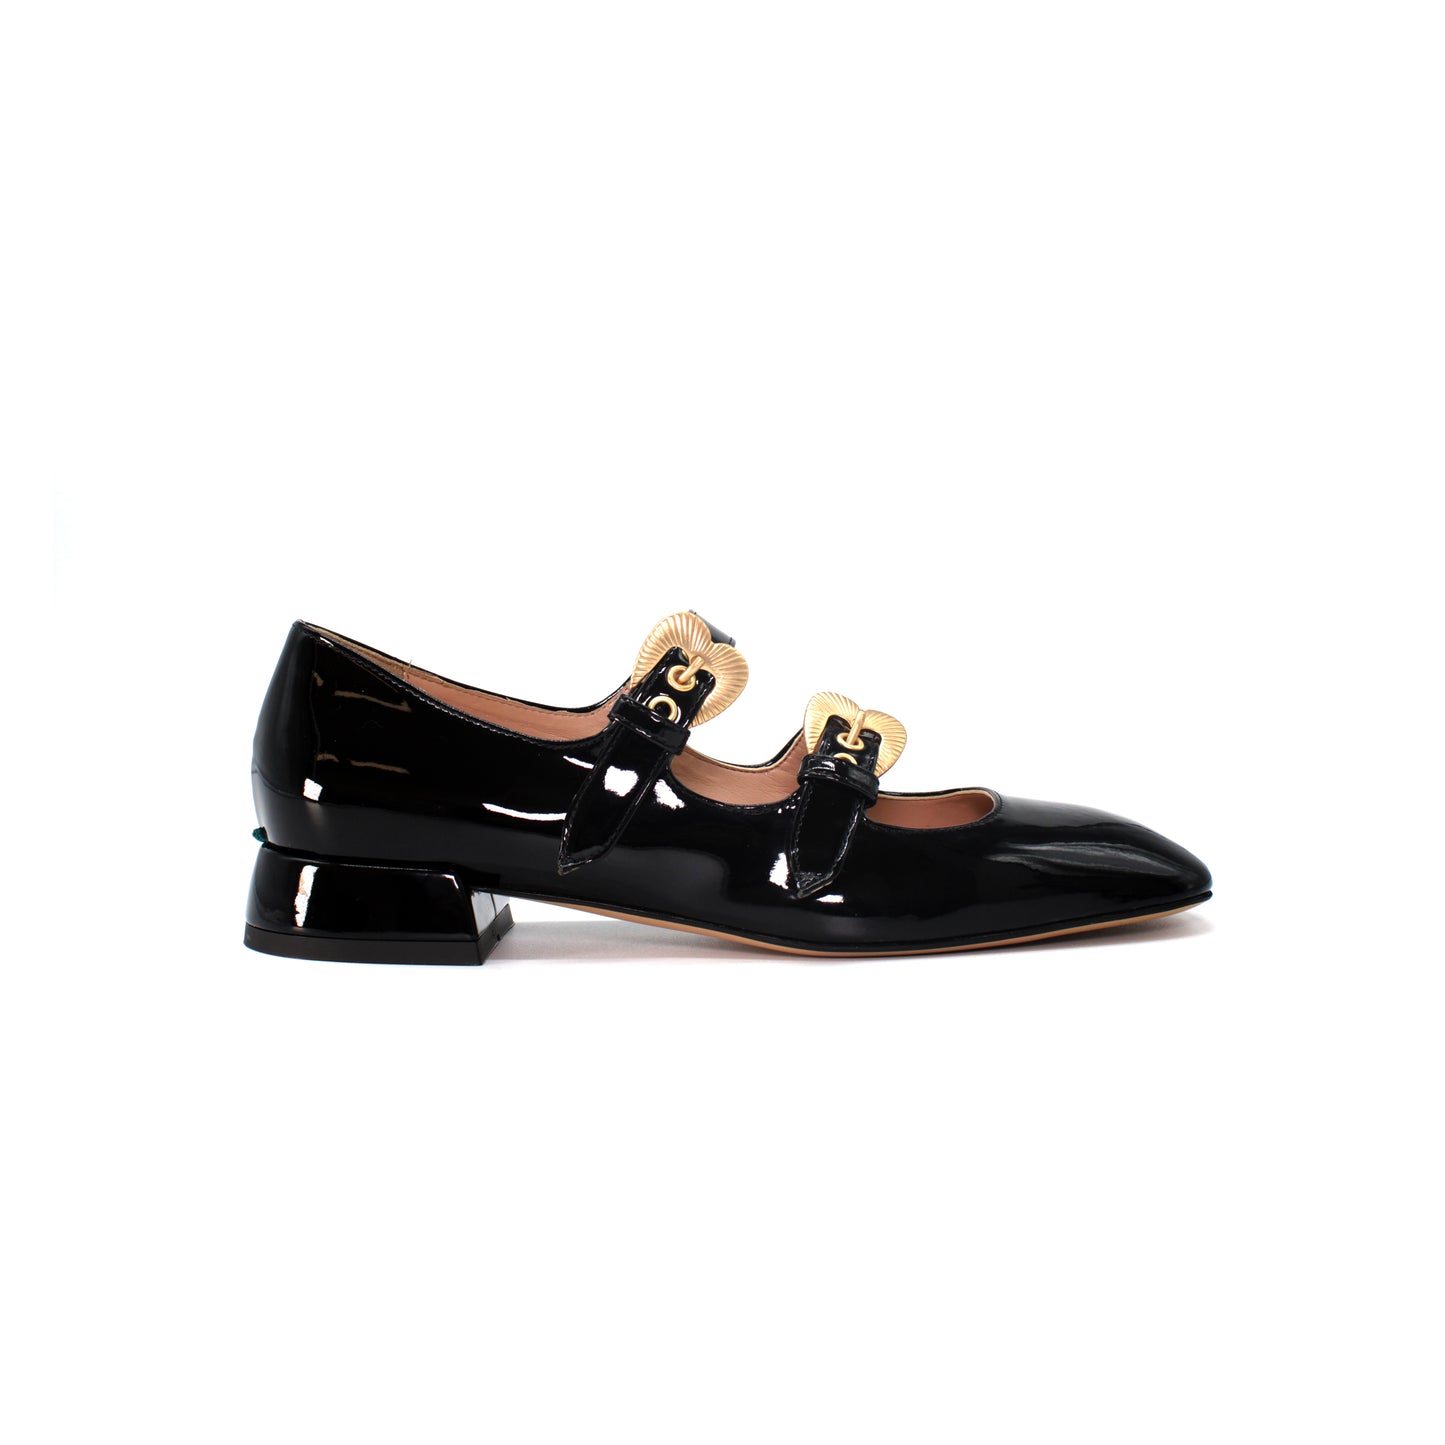 Double Strap in black-colored patent leather - VEGAN